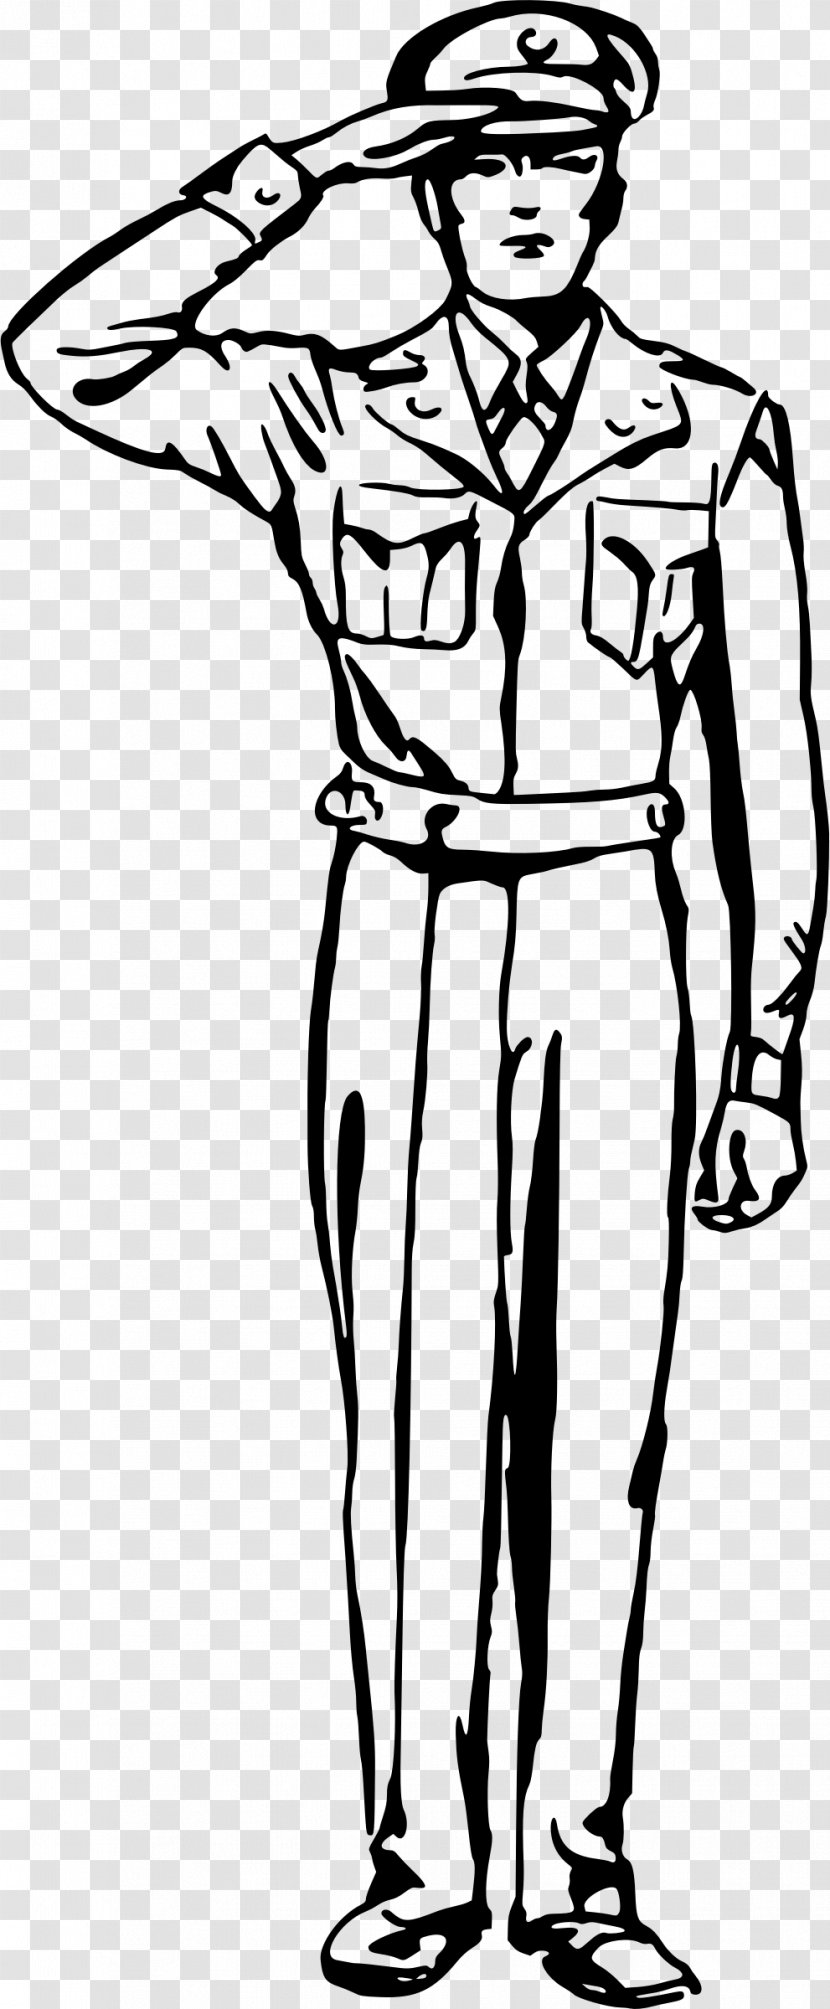 Line Art Soldier Salute Drawing - Military Transparent PNG